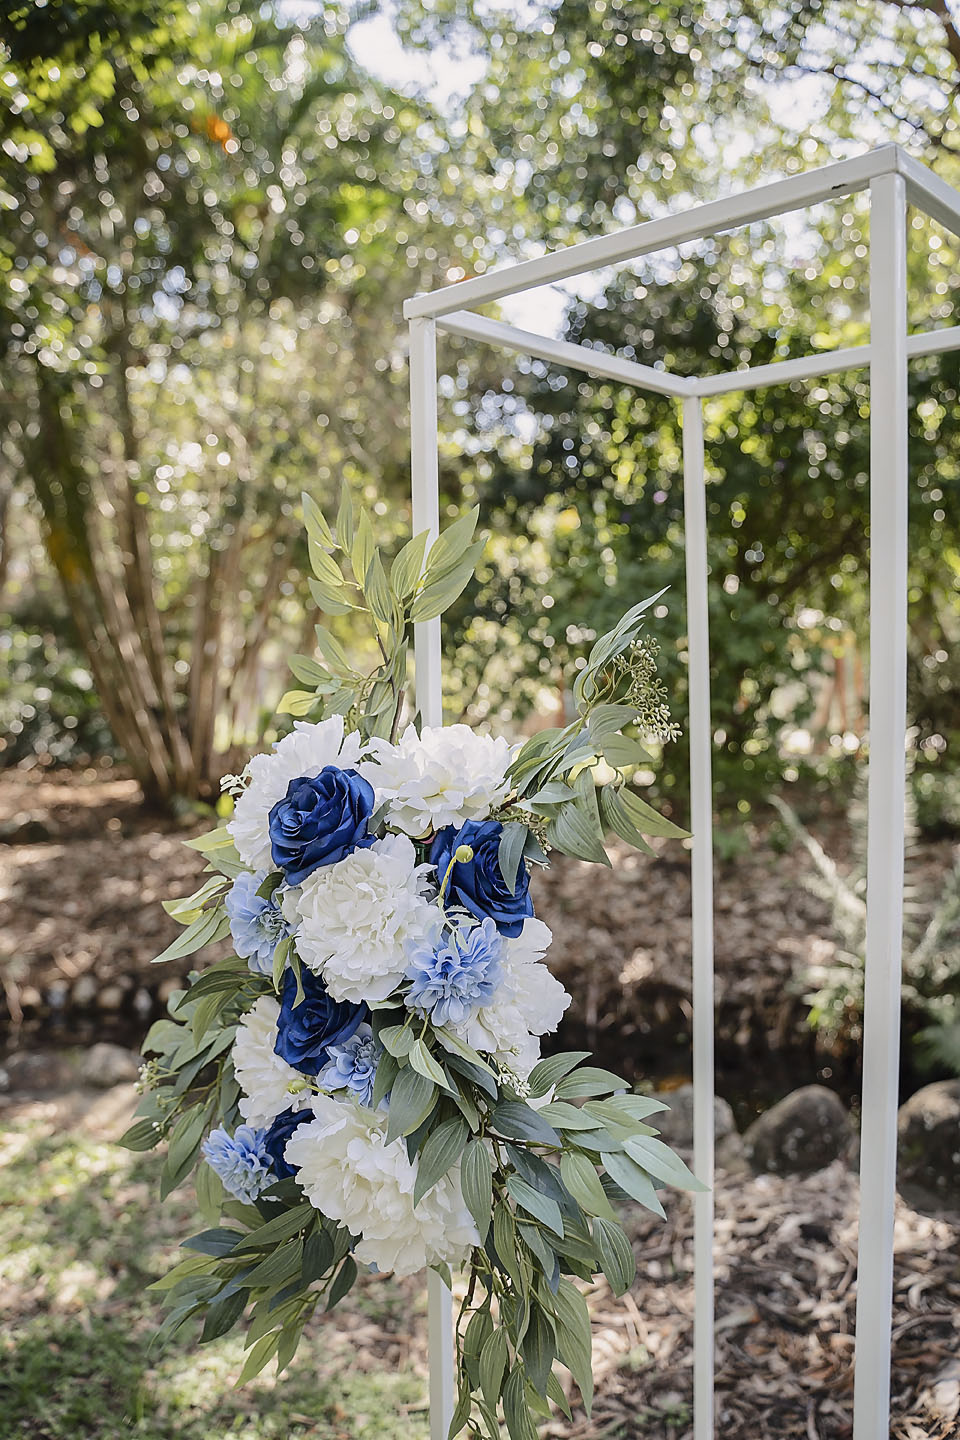 Ceremony styling - Flower stands